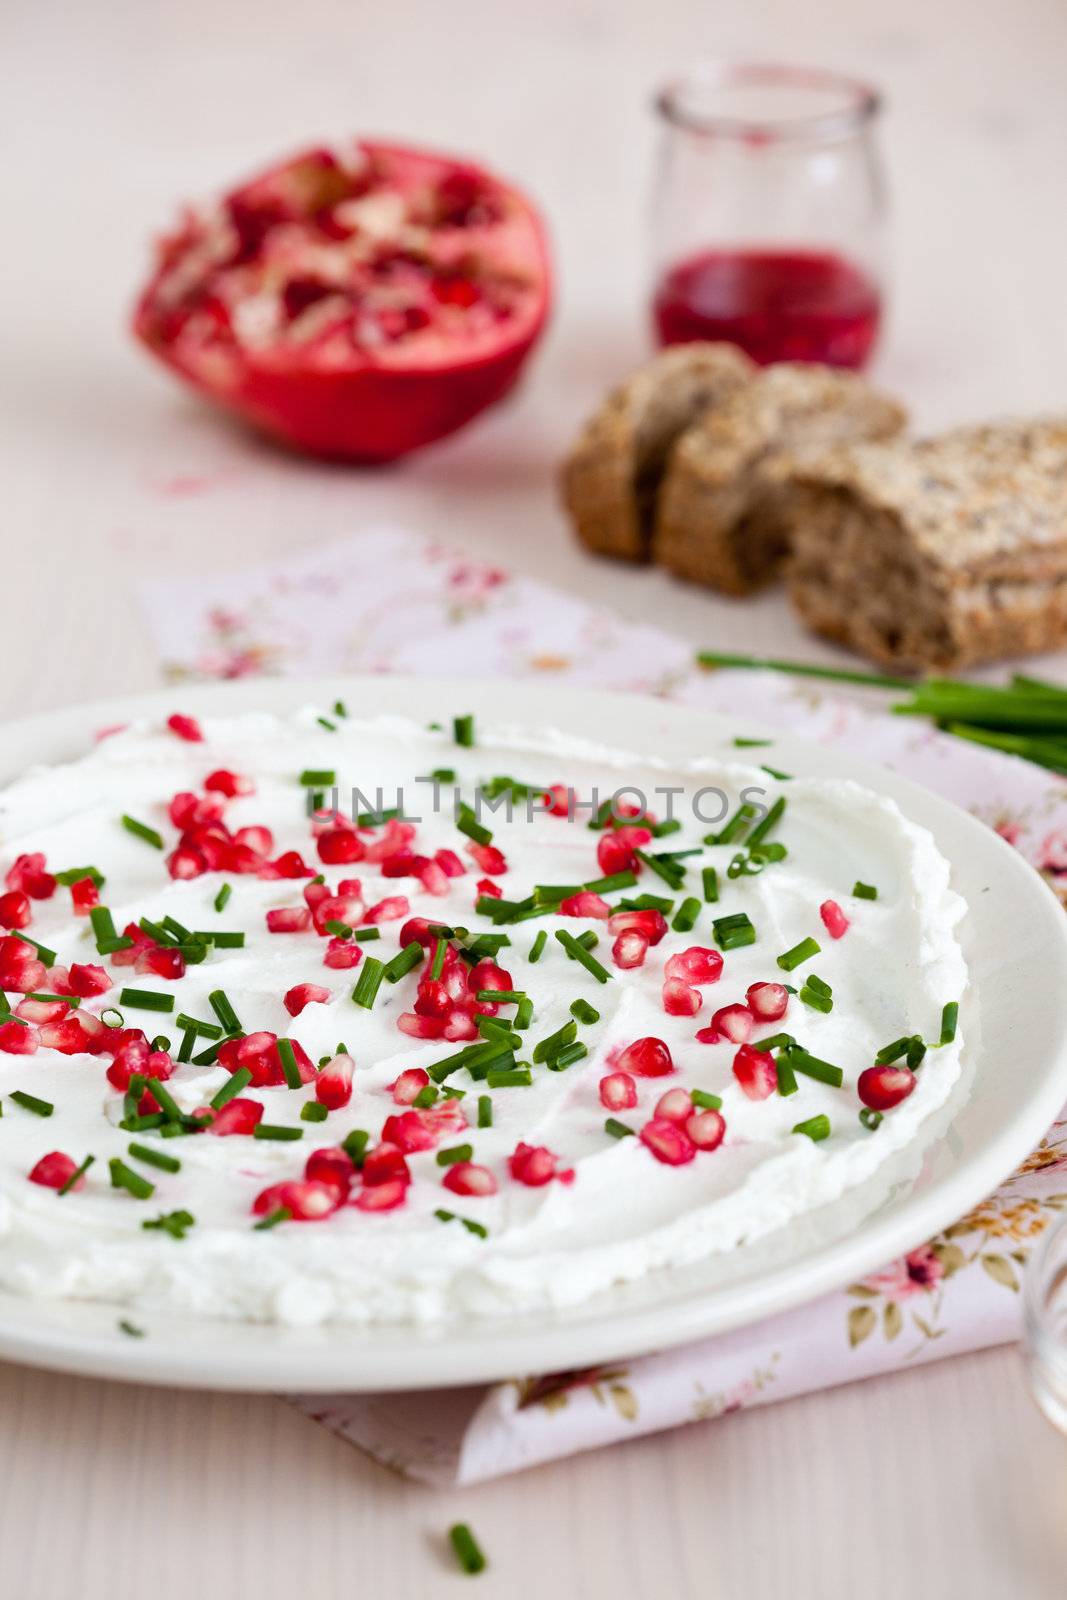 Creamy goatcheese with pomegranate seeds and chives